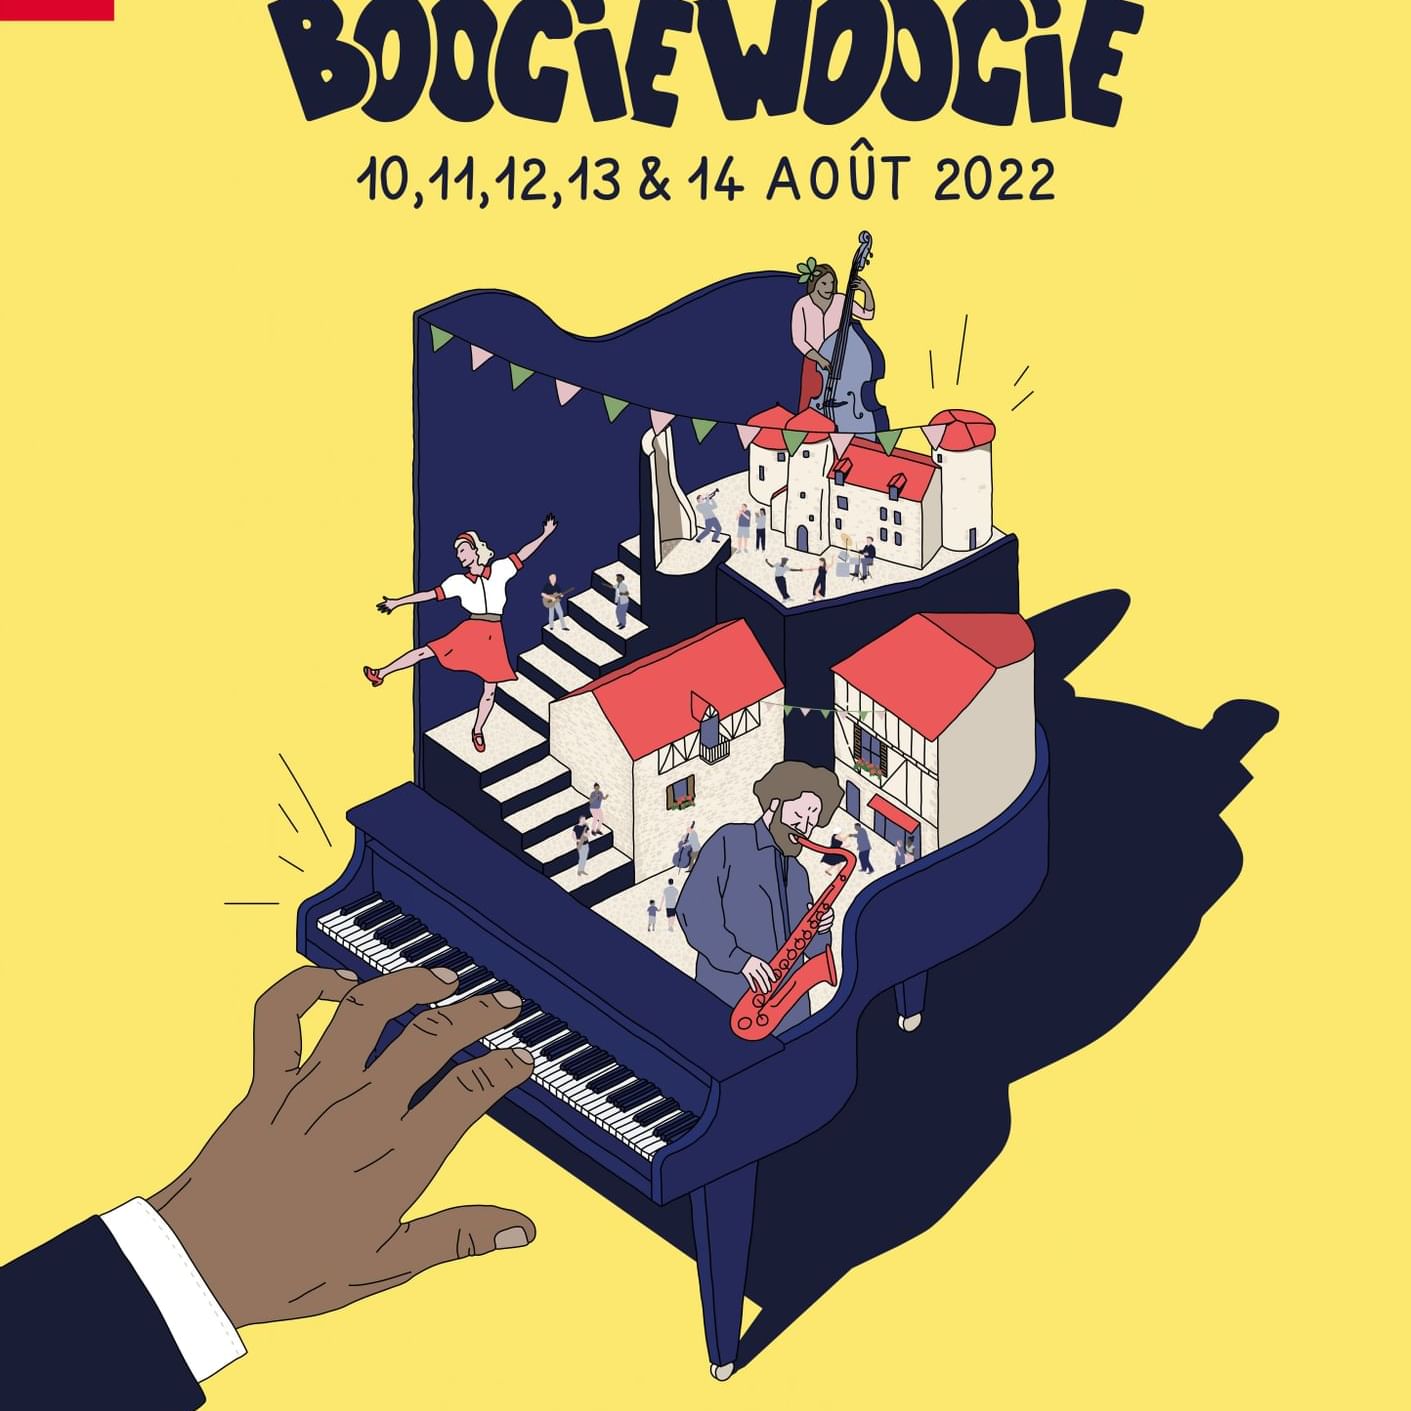 Poster of boogie-woogie music event near The Originals Hotels